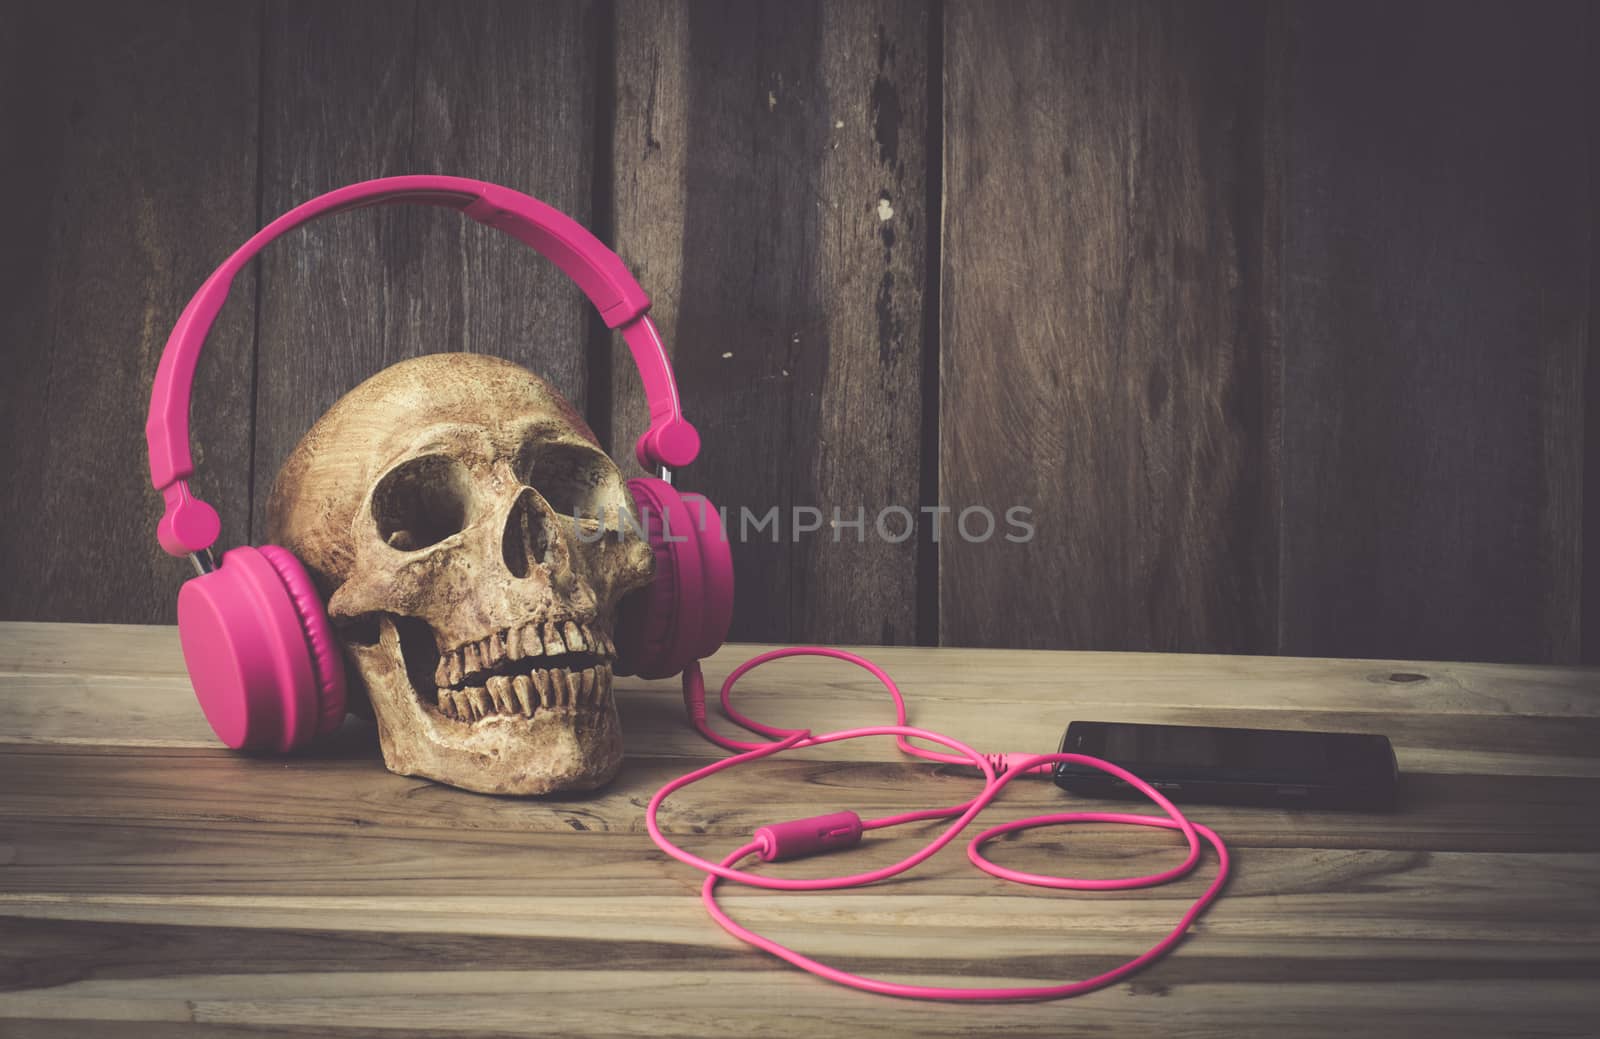 Still life human skull model with pink headphones on wooden background by photobyphotoboy